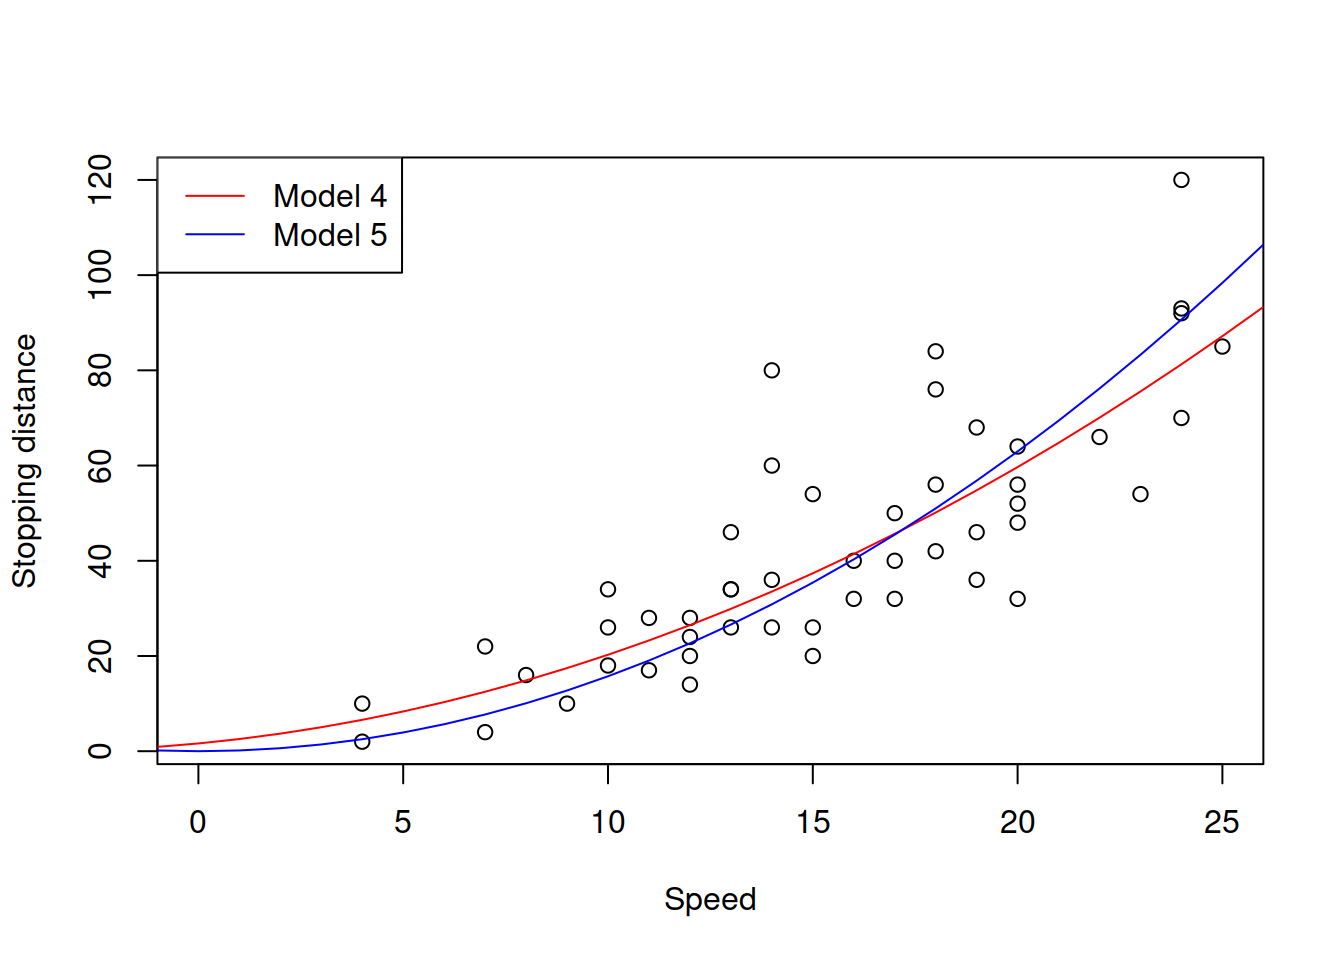 Speed squared vs stopping distance with Square Root models.